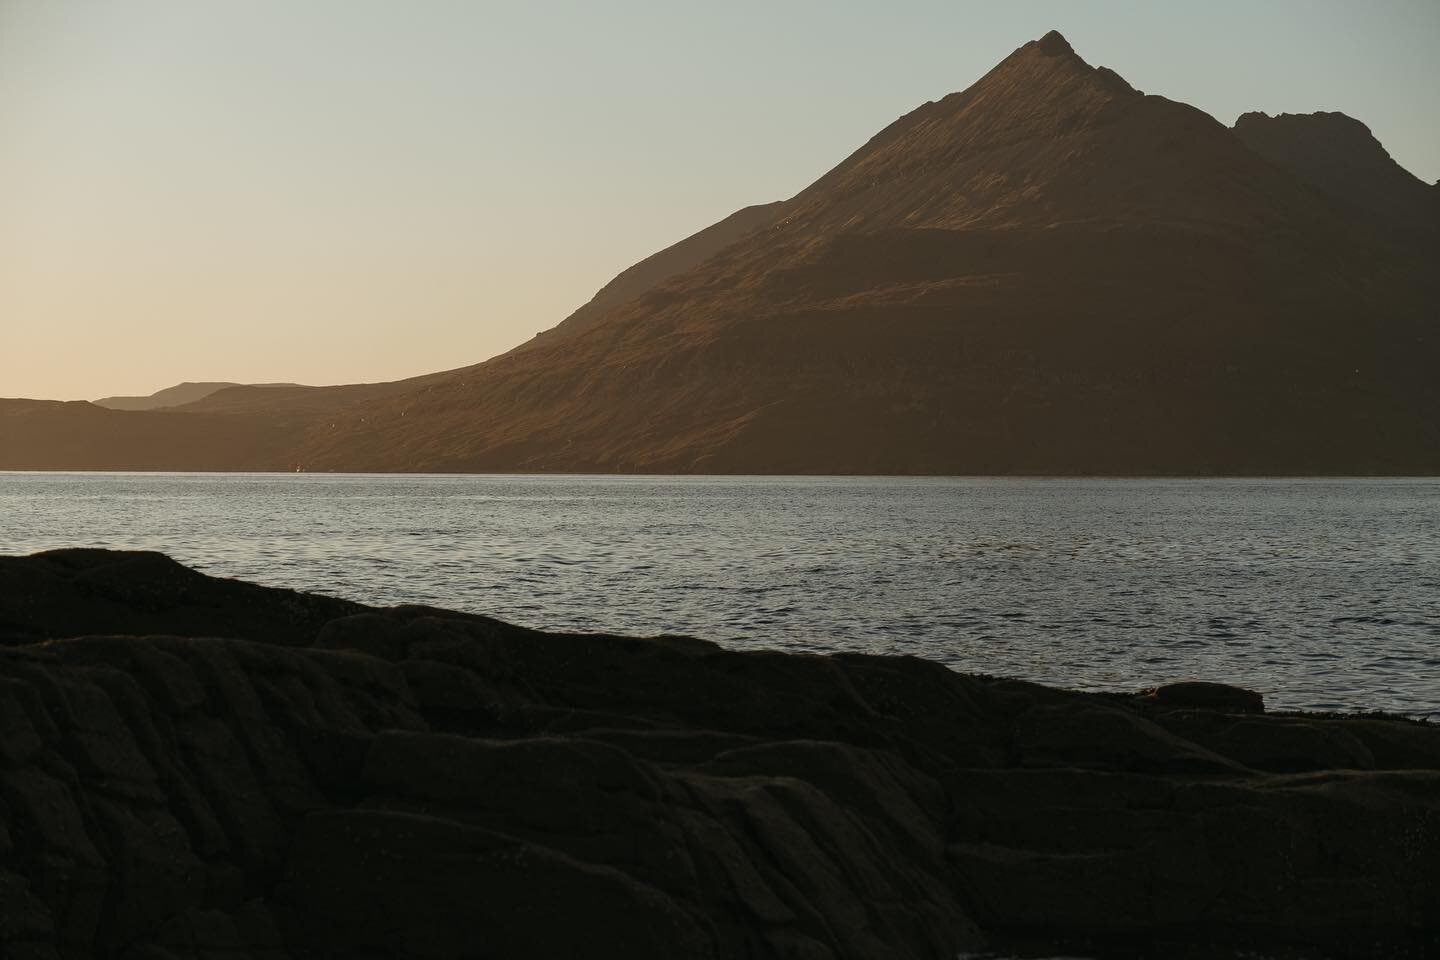 Aimless wanderings paired with a dash of good luck - the best way to experience a sunset on Isle of Skye.